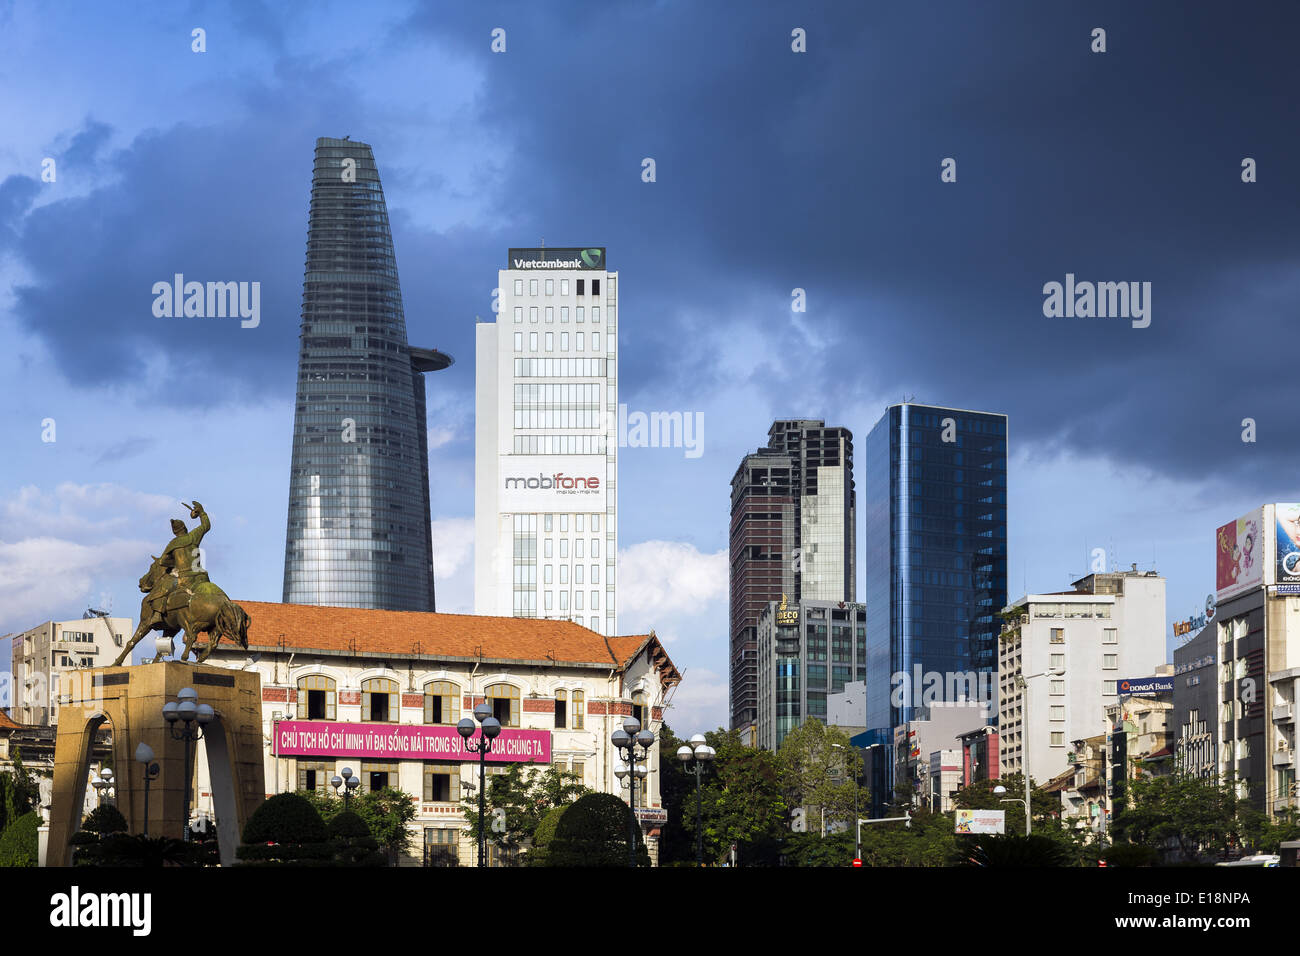 View from the roundabout Quach Thi Trang of some of the tallest buildings in Ho Chi Minh City Stock Photo